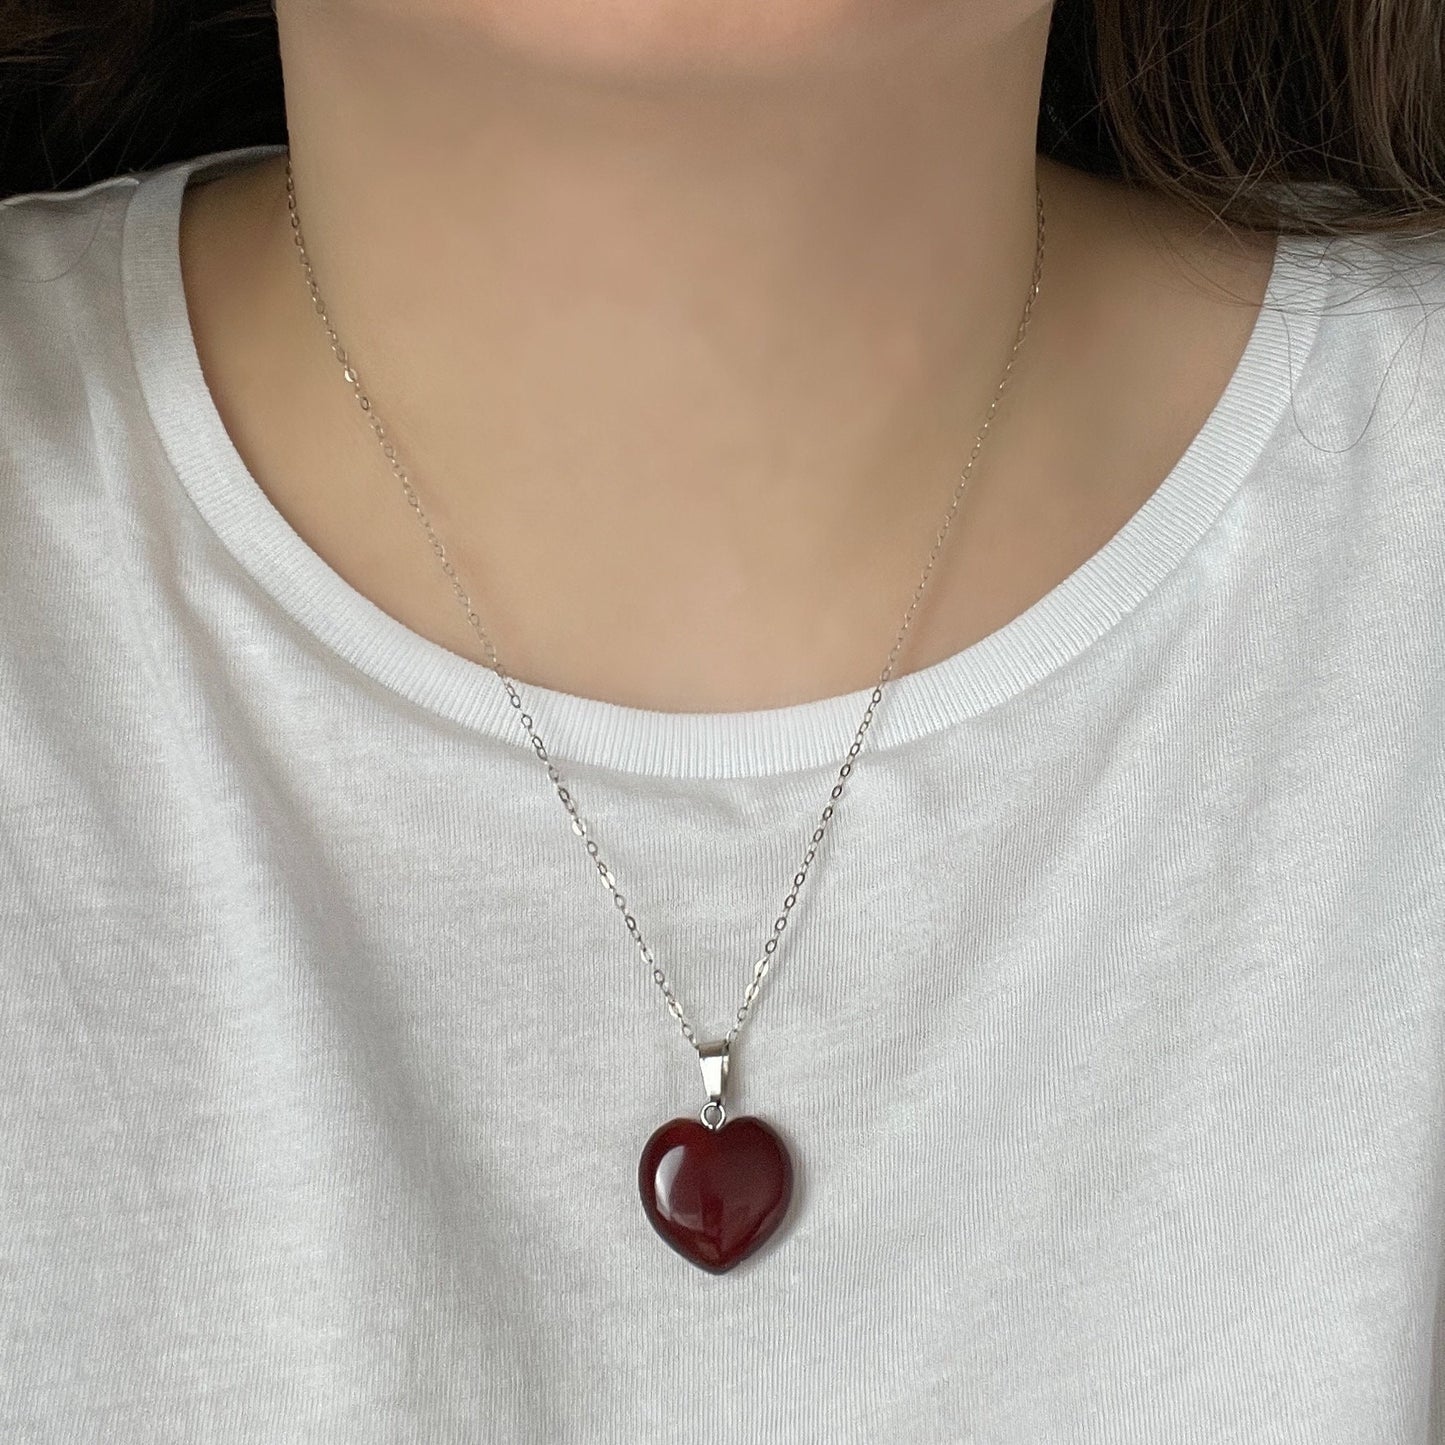 Natural Gemstone Carnelian Heart Necklace on 925 Sterling Silver Chain, Valentines Day Gift Women, M6-132